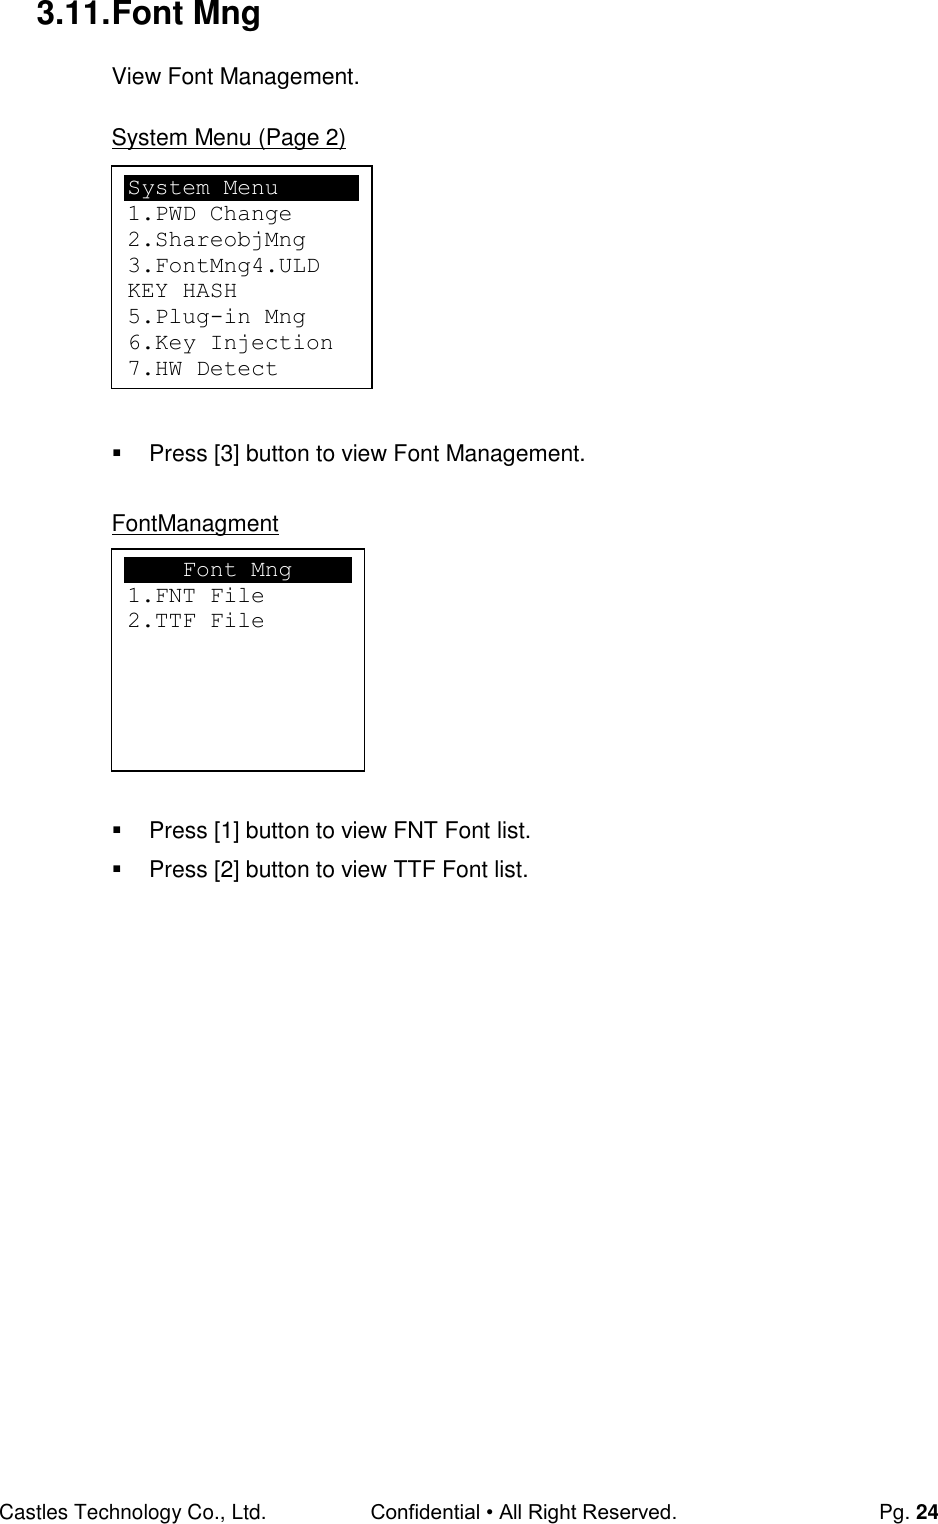 Castles Technology Co., Ltd. Confidential • All Right Reserved.  Pg. 24 3.11. Font Mng View Font Management.  System Menu (Page 2)          Press [3] button to view Font Management.  FontManagment          Press [1] button to view FNT Font list.   Press [2] button to view TTF Font list.                       Font Mng 1.FNT File 2.TTF File System Menu 1.PWD Change 2.ShareobjMng 3.FontMng4.ULD KEY HASH 5.Plug-in Mng 6.Key Injection 7.HW Detect  